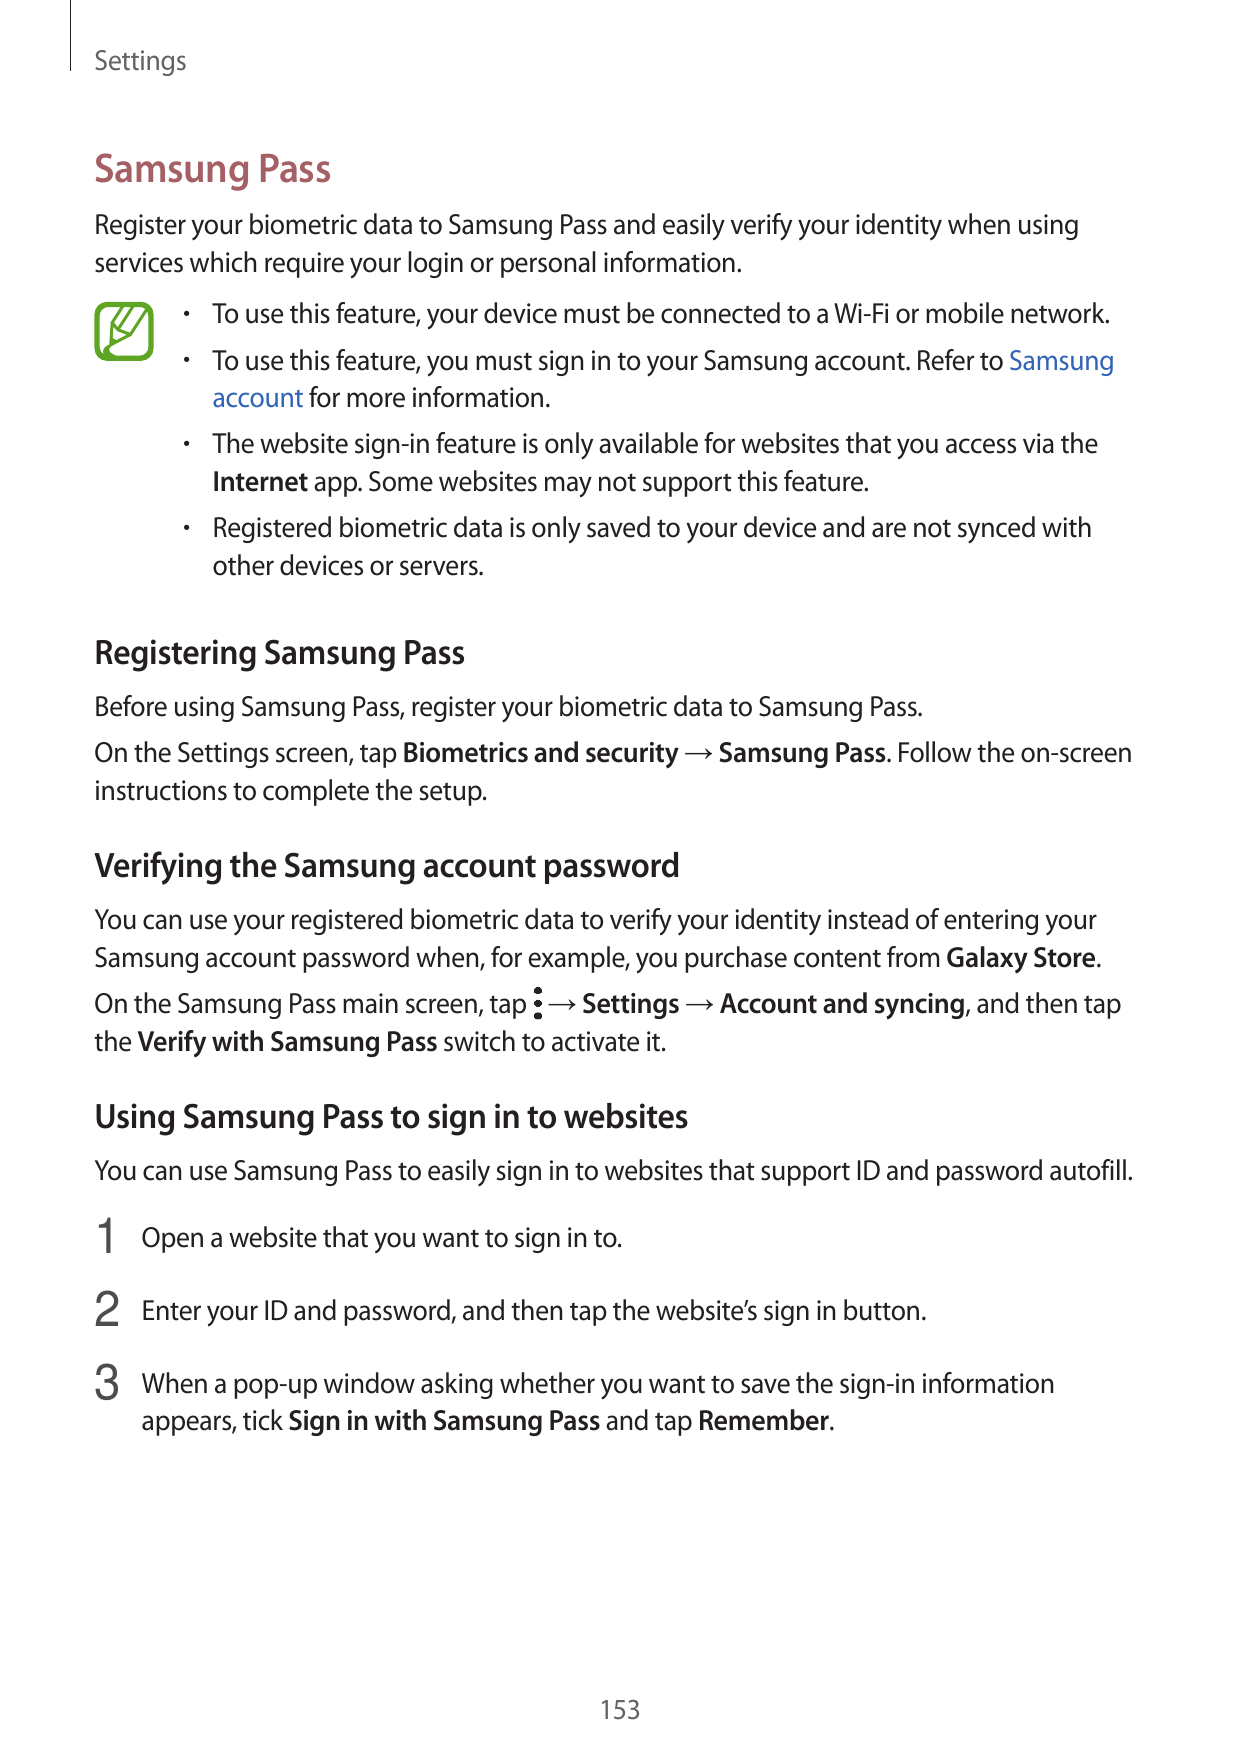 SettingsSamsung PassRegister your biometric data to Samsung Pass and easily verify your identity when usingservices which requir